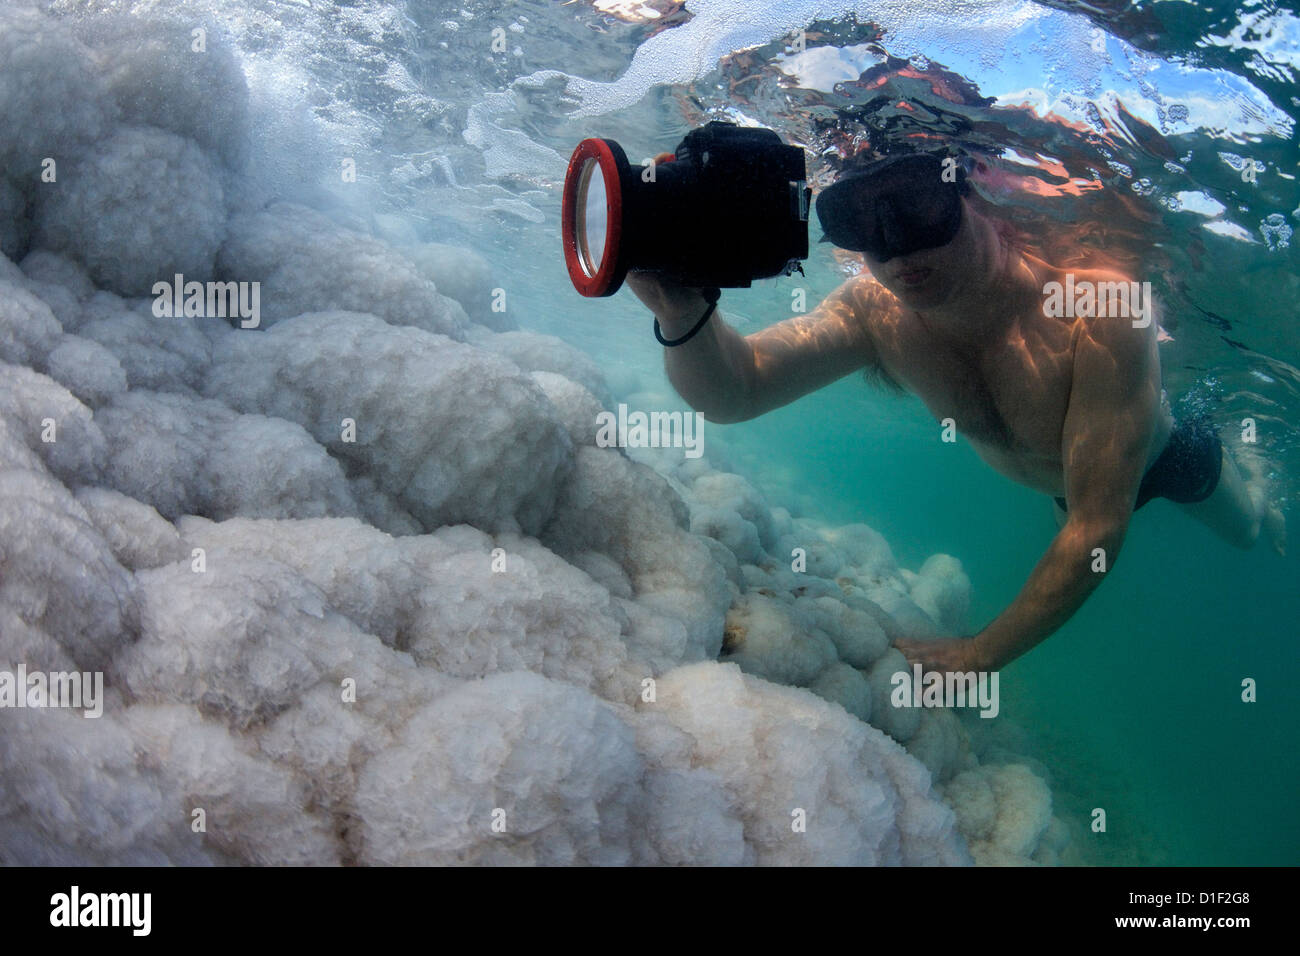 Man taking picture of salt crystal formations over rocks in the Dead Sea, Israel, underwater shot Stock Photo